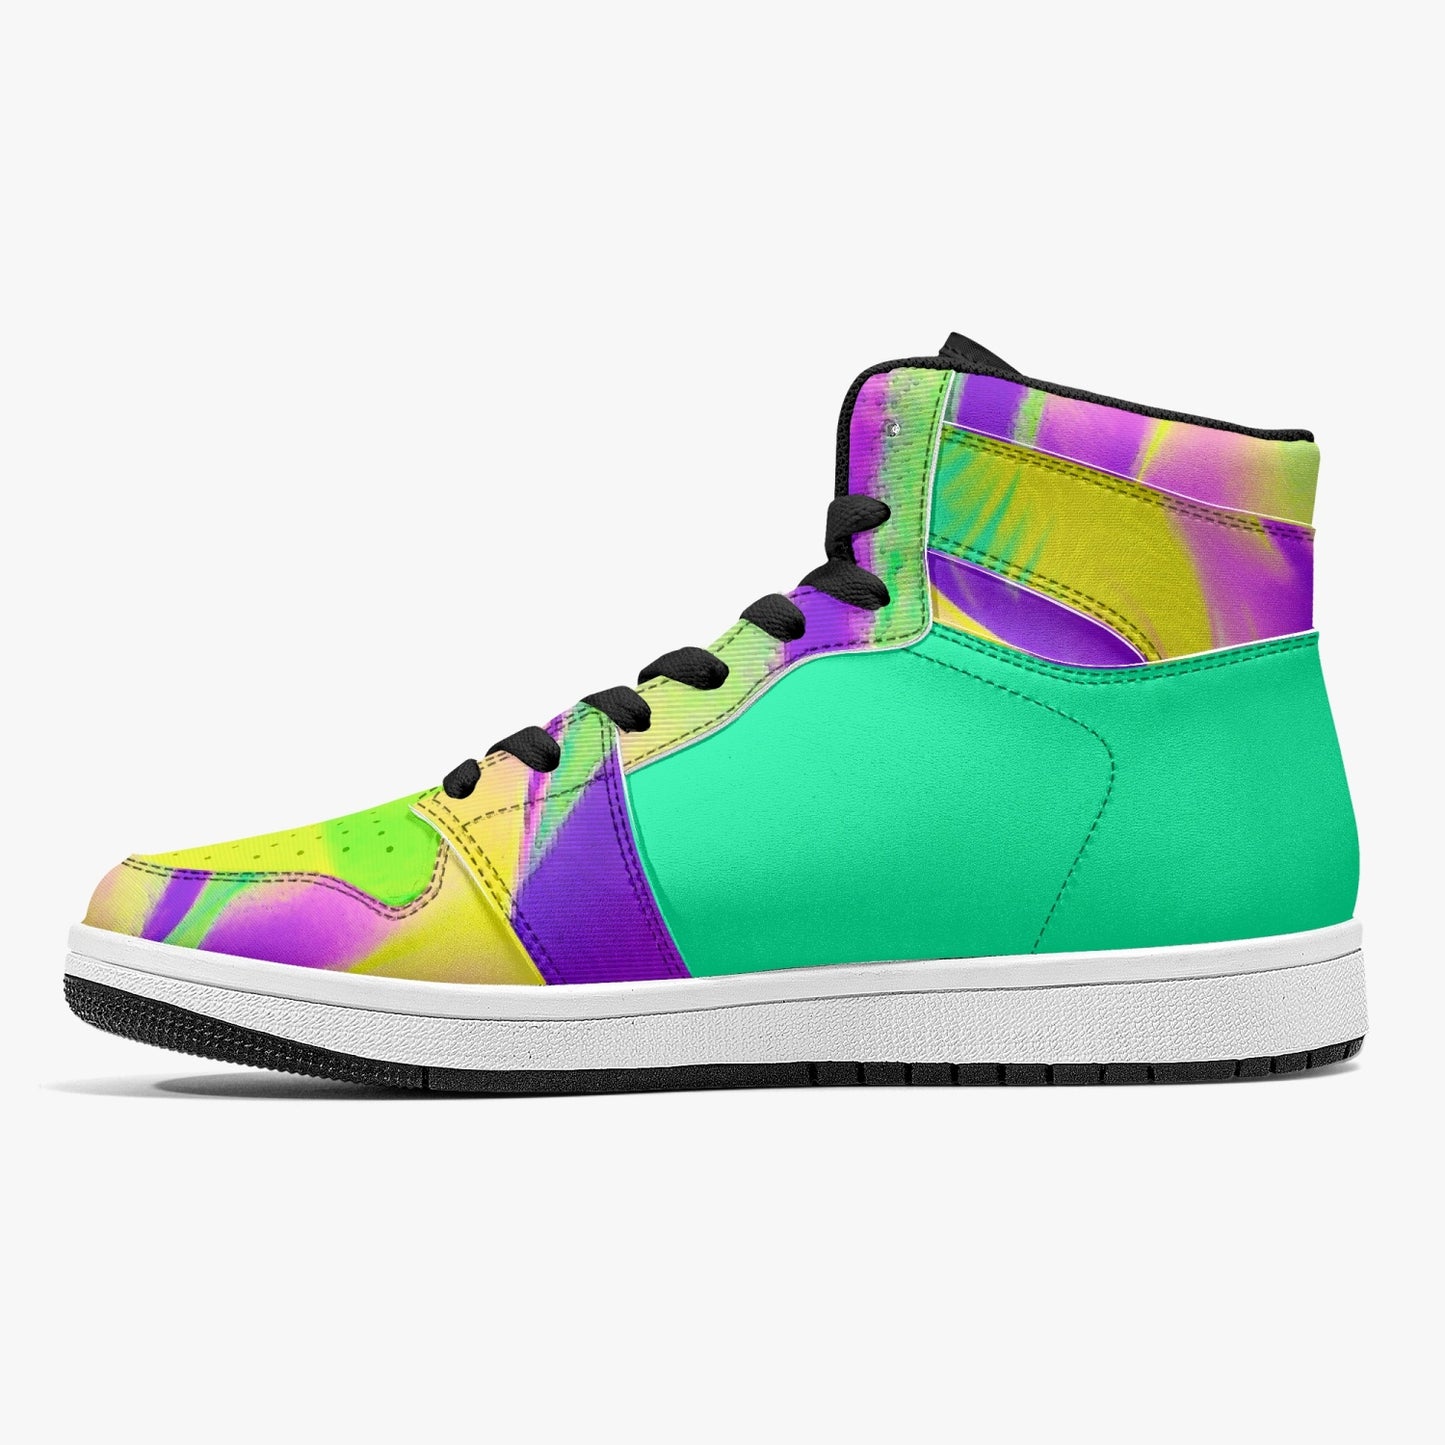 Almost Green - Macr.in (High-Top Leather Sneakers)